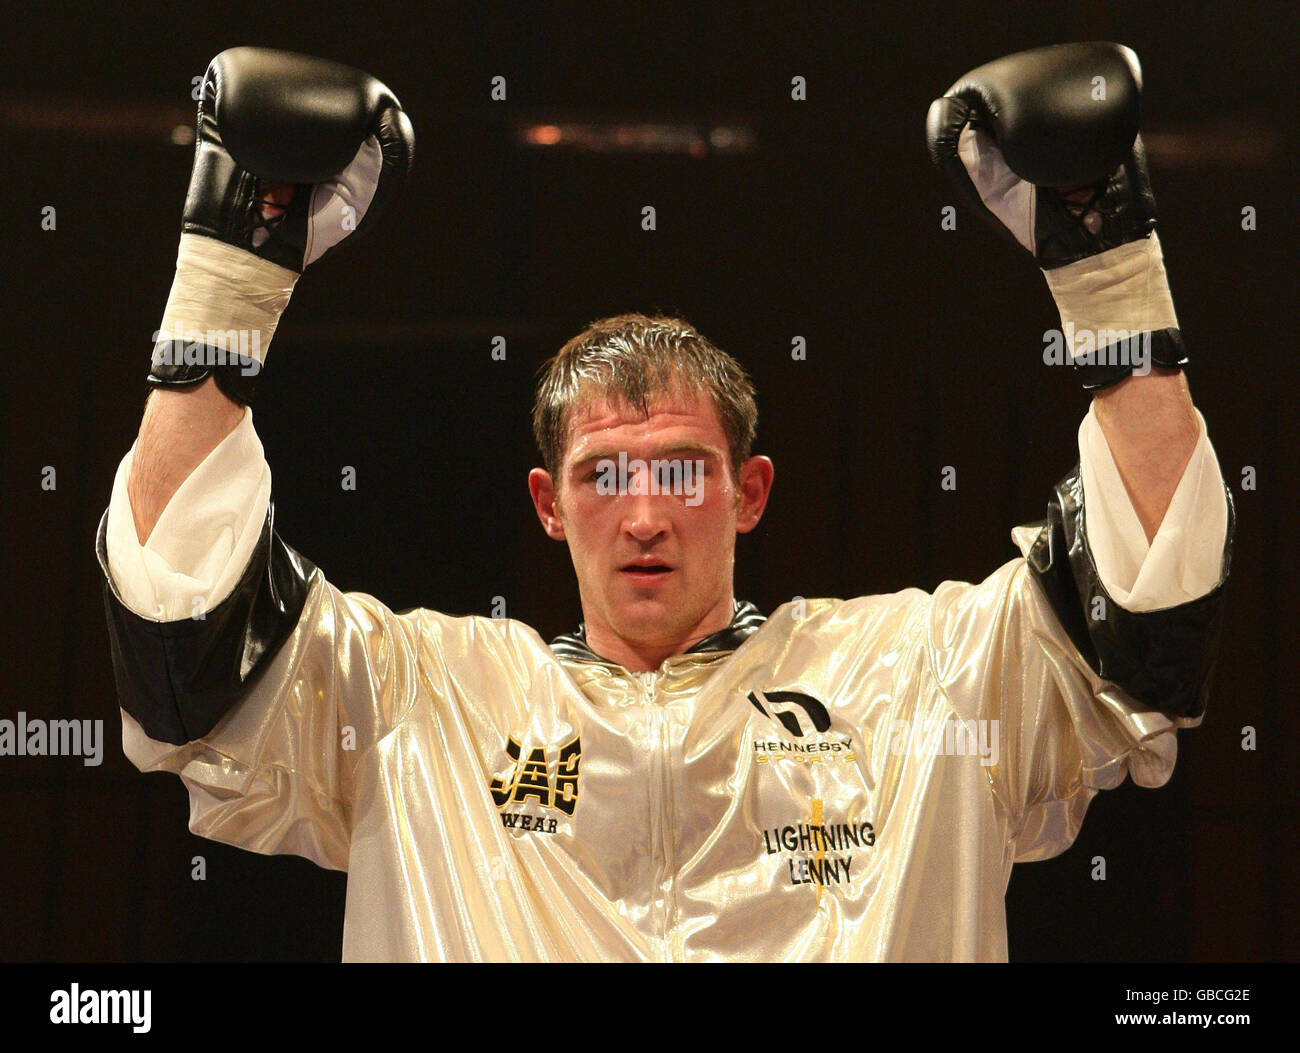 Lenny Daws after beating Sergejs Savrinovics on the undercard of the British Lightweight Title fight at the Robin Park Centre, Wigan. Stock Photo